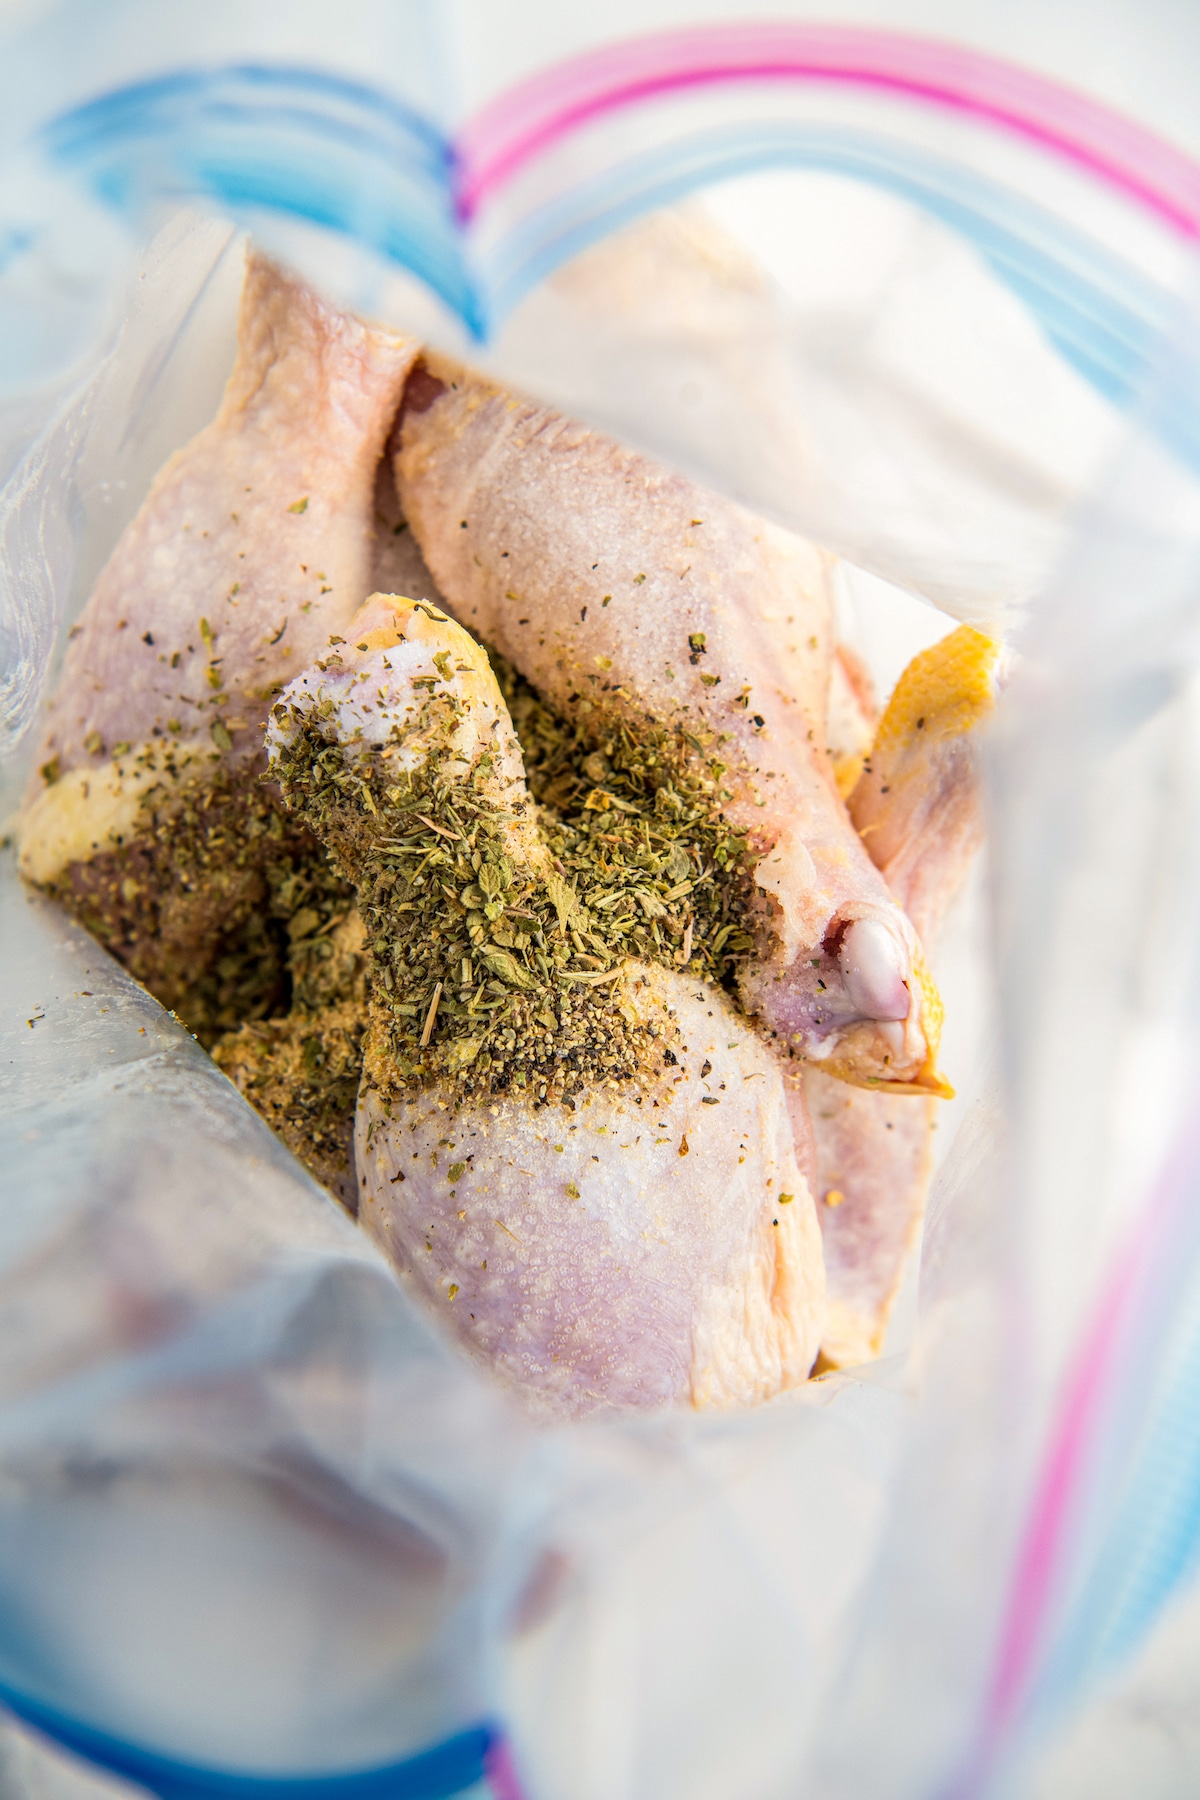 Raw chicken legs in a ziplock bag with seasonings poured on top.